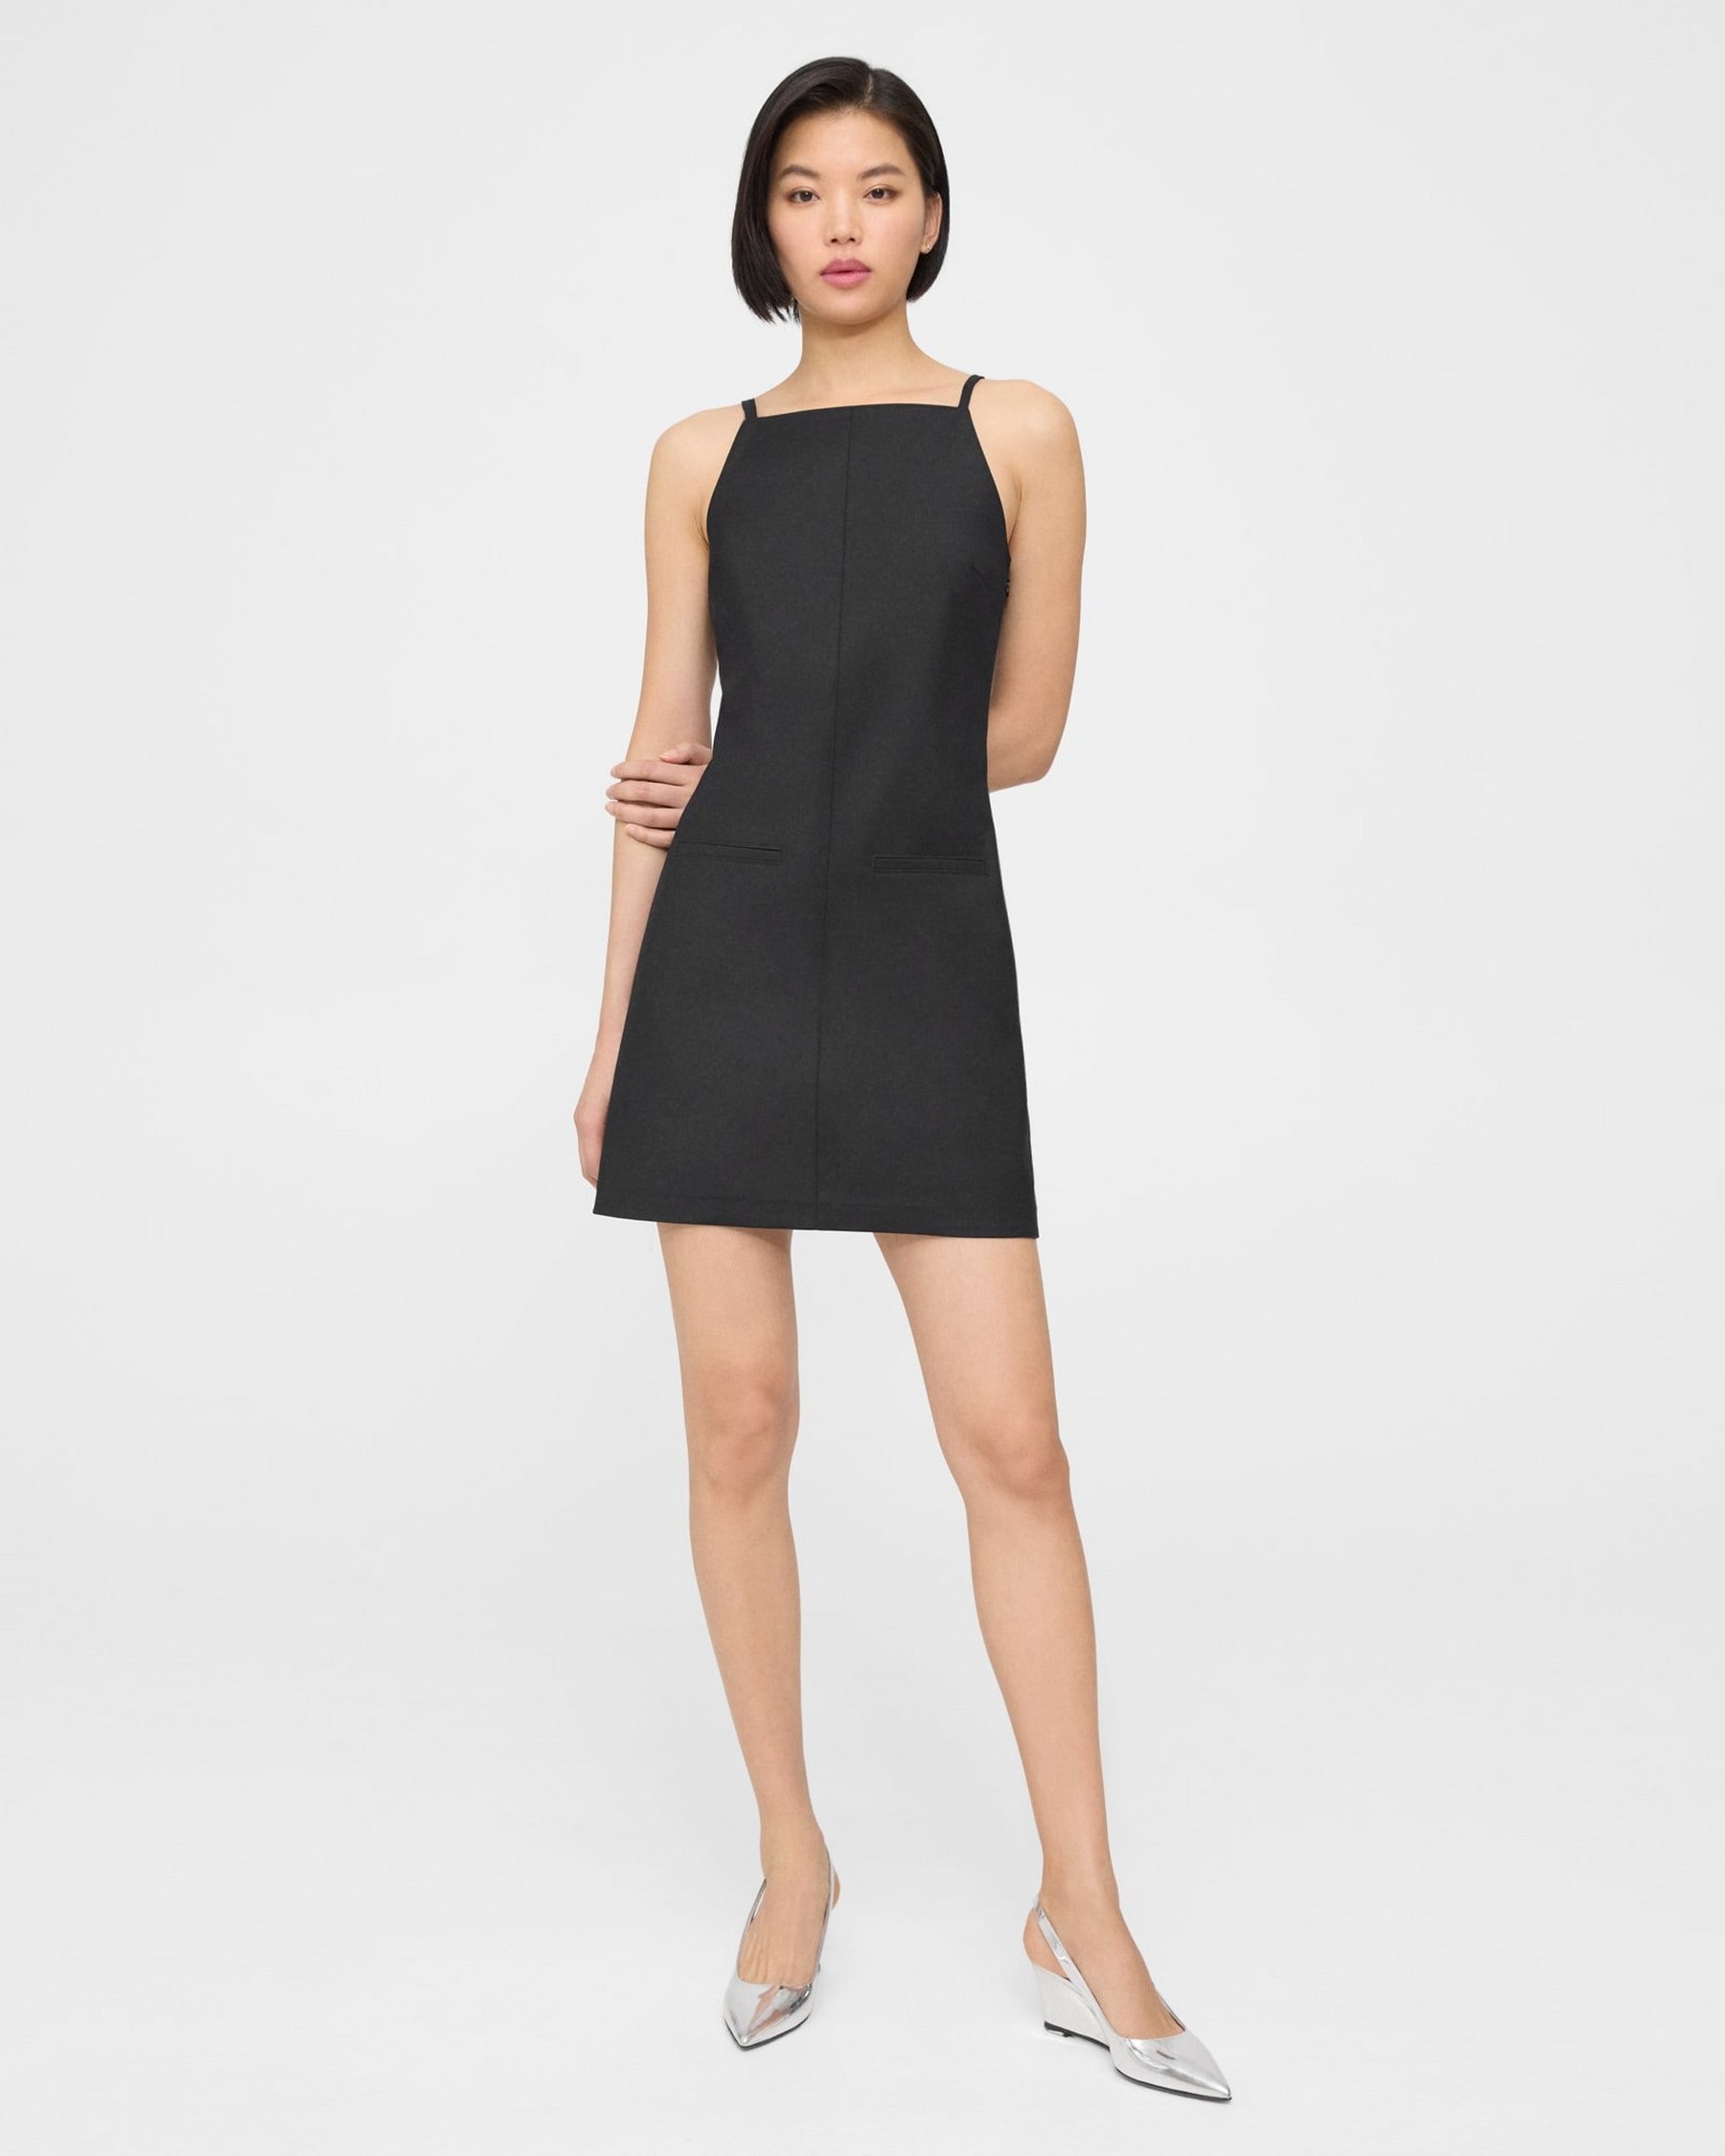 Theory Square Neck Dress in Cotton-Blend